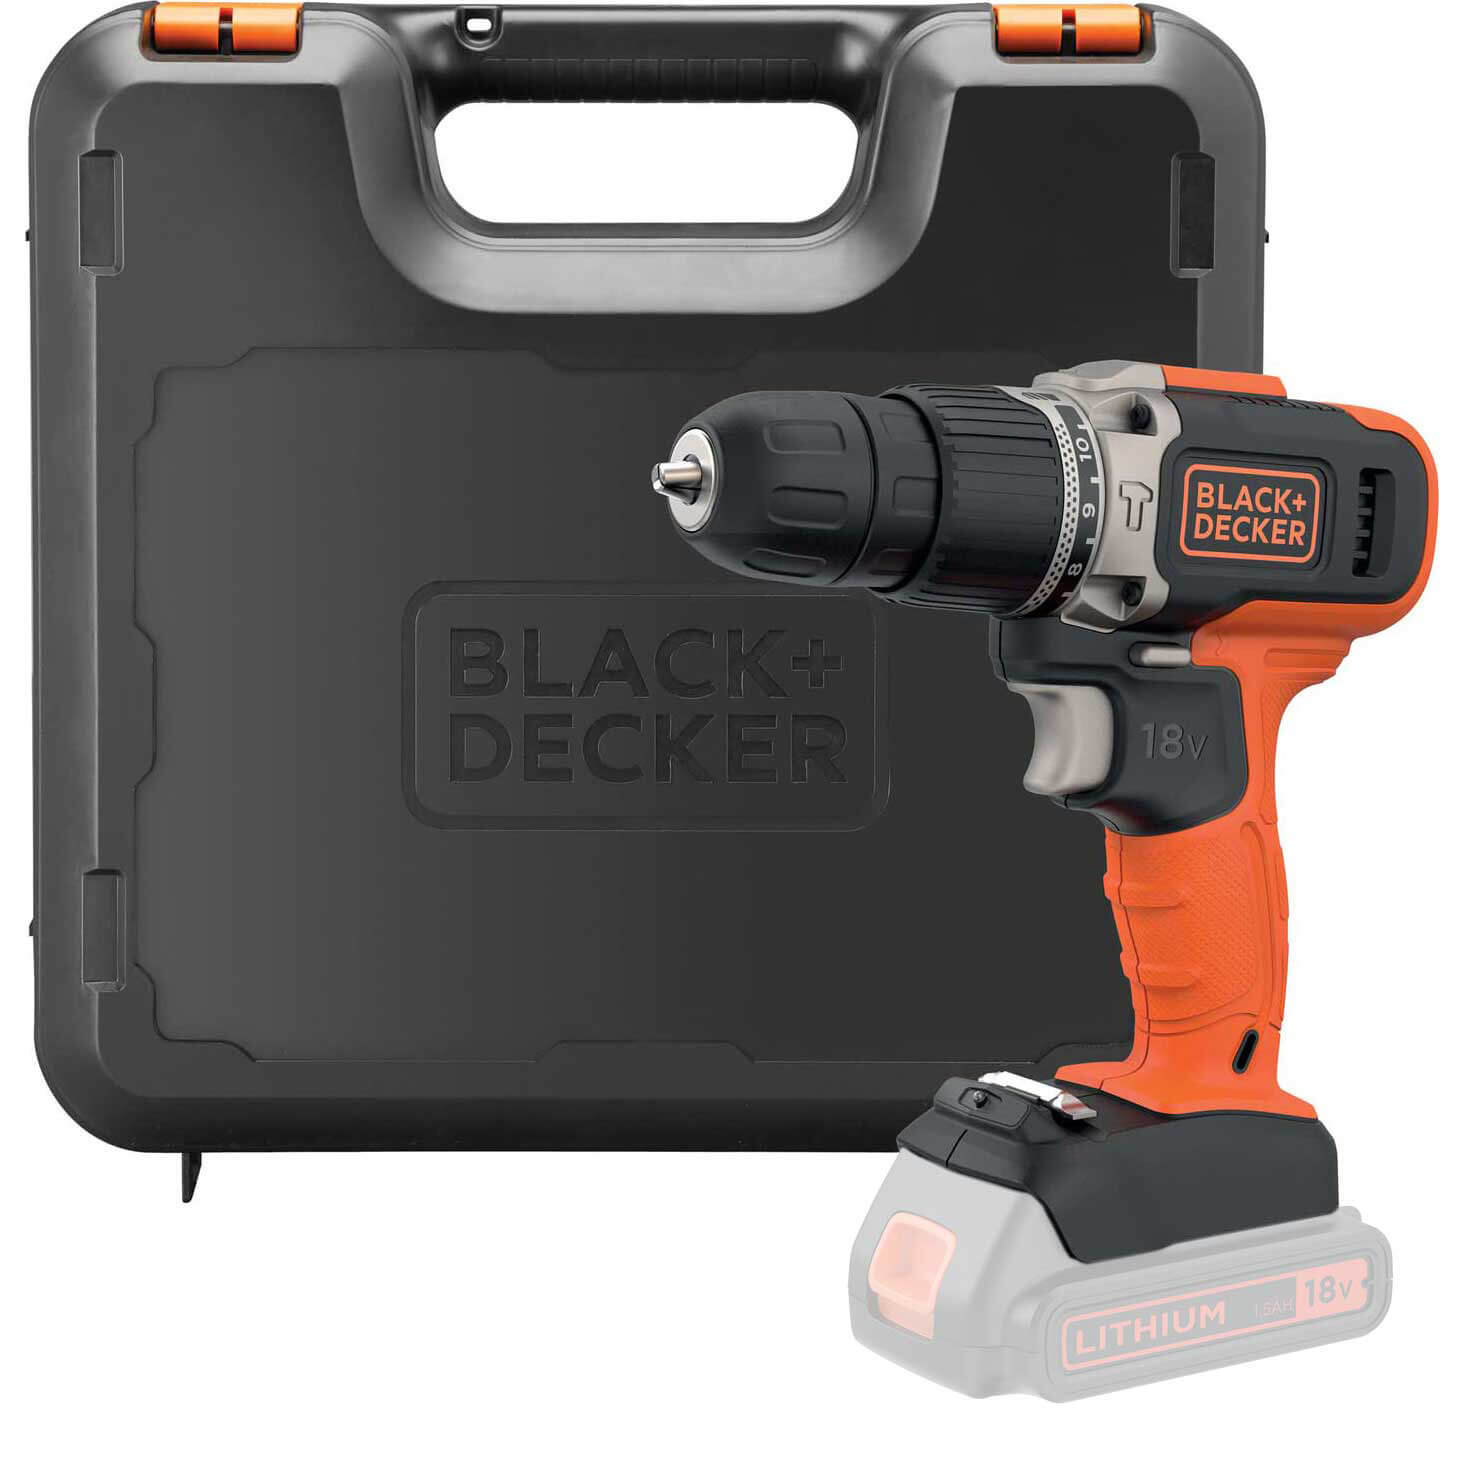 Black and Decker BCD003C 18v Cordless Combi Drill No Batteries No Charger Case